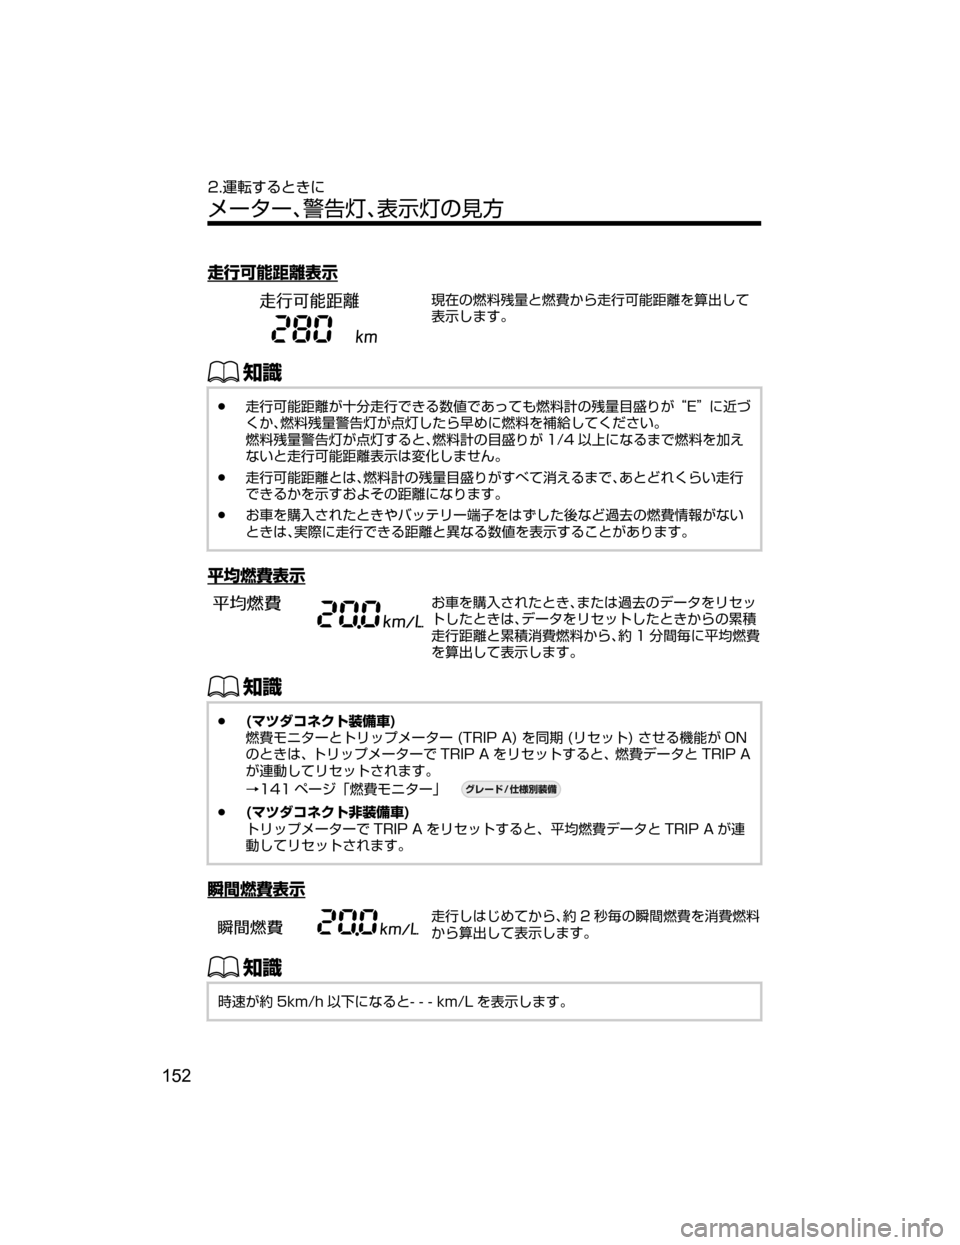 Mazda Model Axela 18 取扱説明書 アクセラ In Japanese 768 Pages Page 0 Z 9 O O